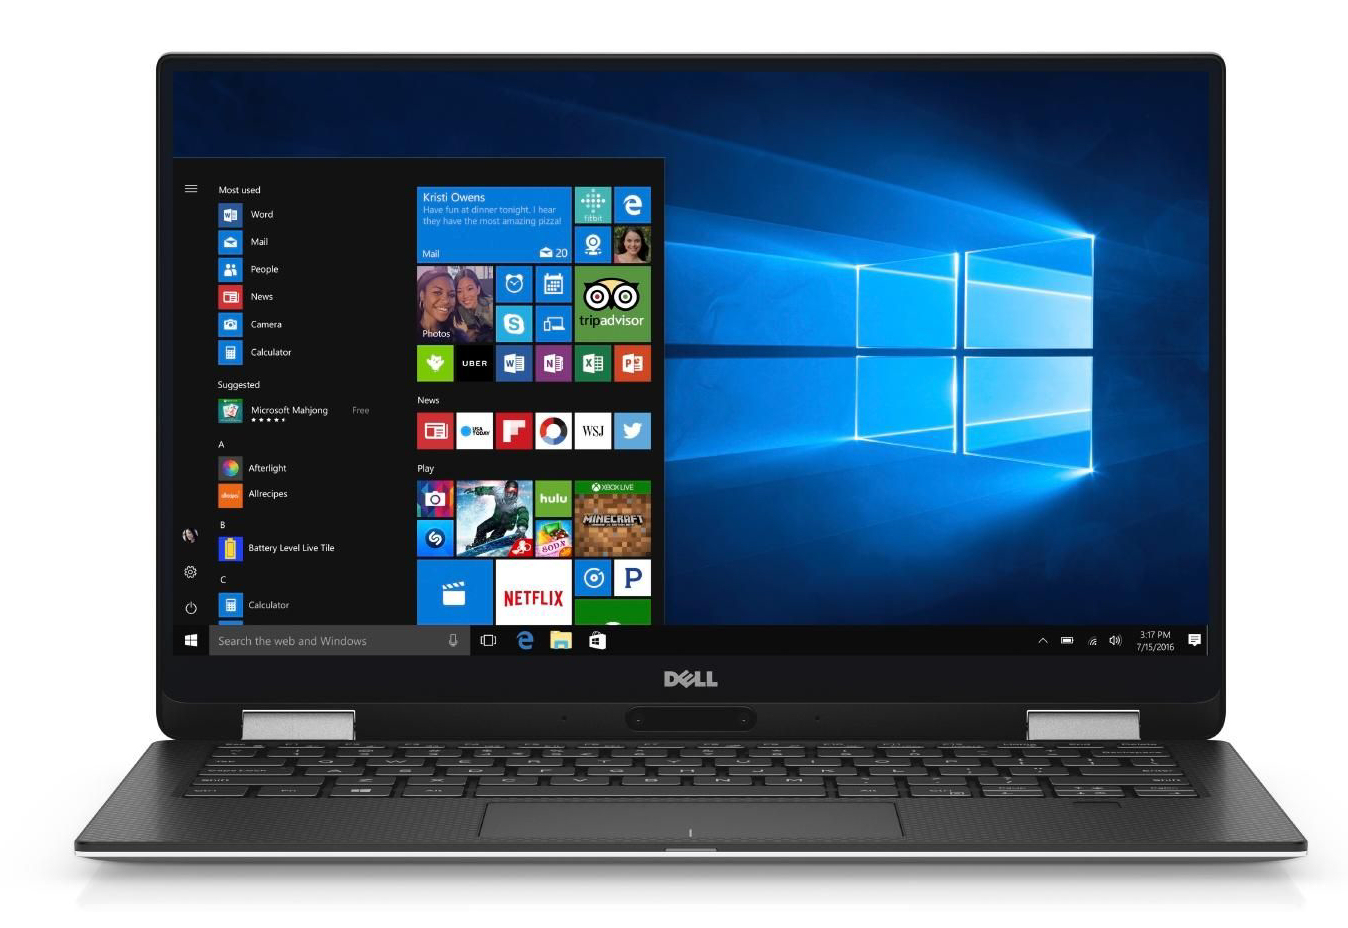 Dell XPS 13 9365 (7Y54, QHD+) Convertible Review - NotebookCheck ...